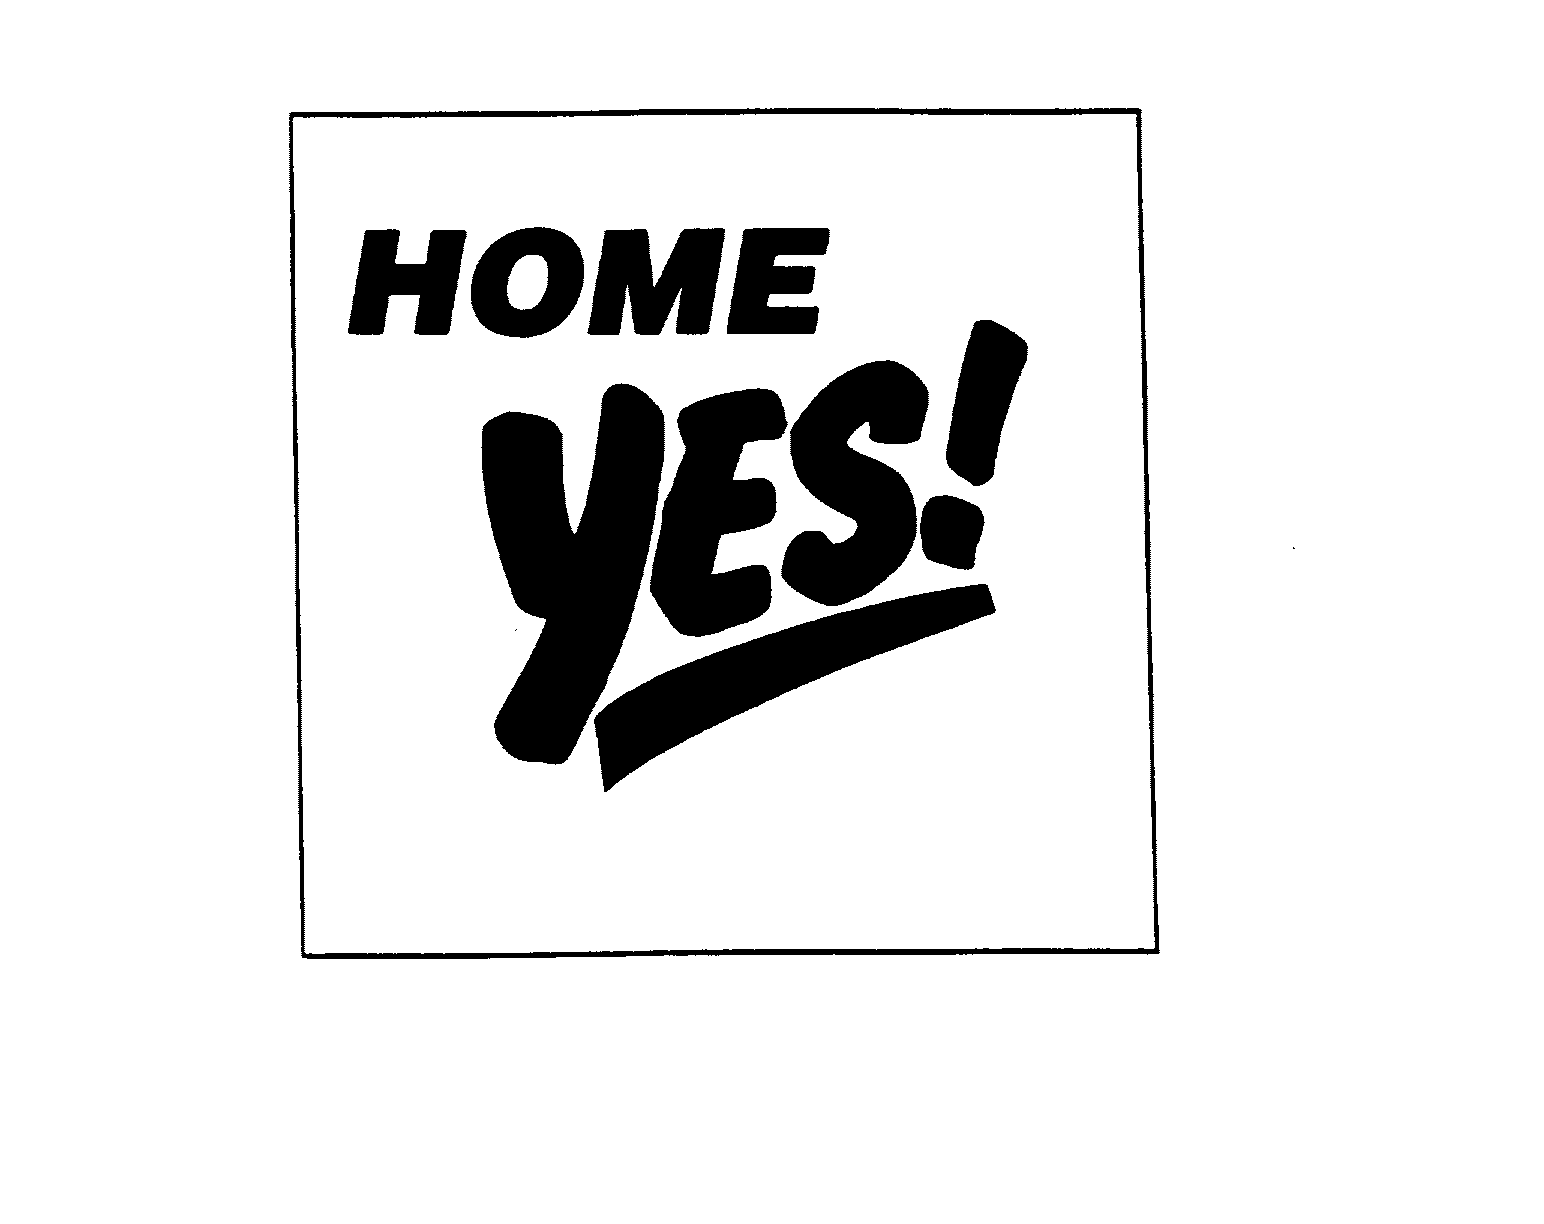  HOME YES!